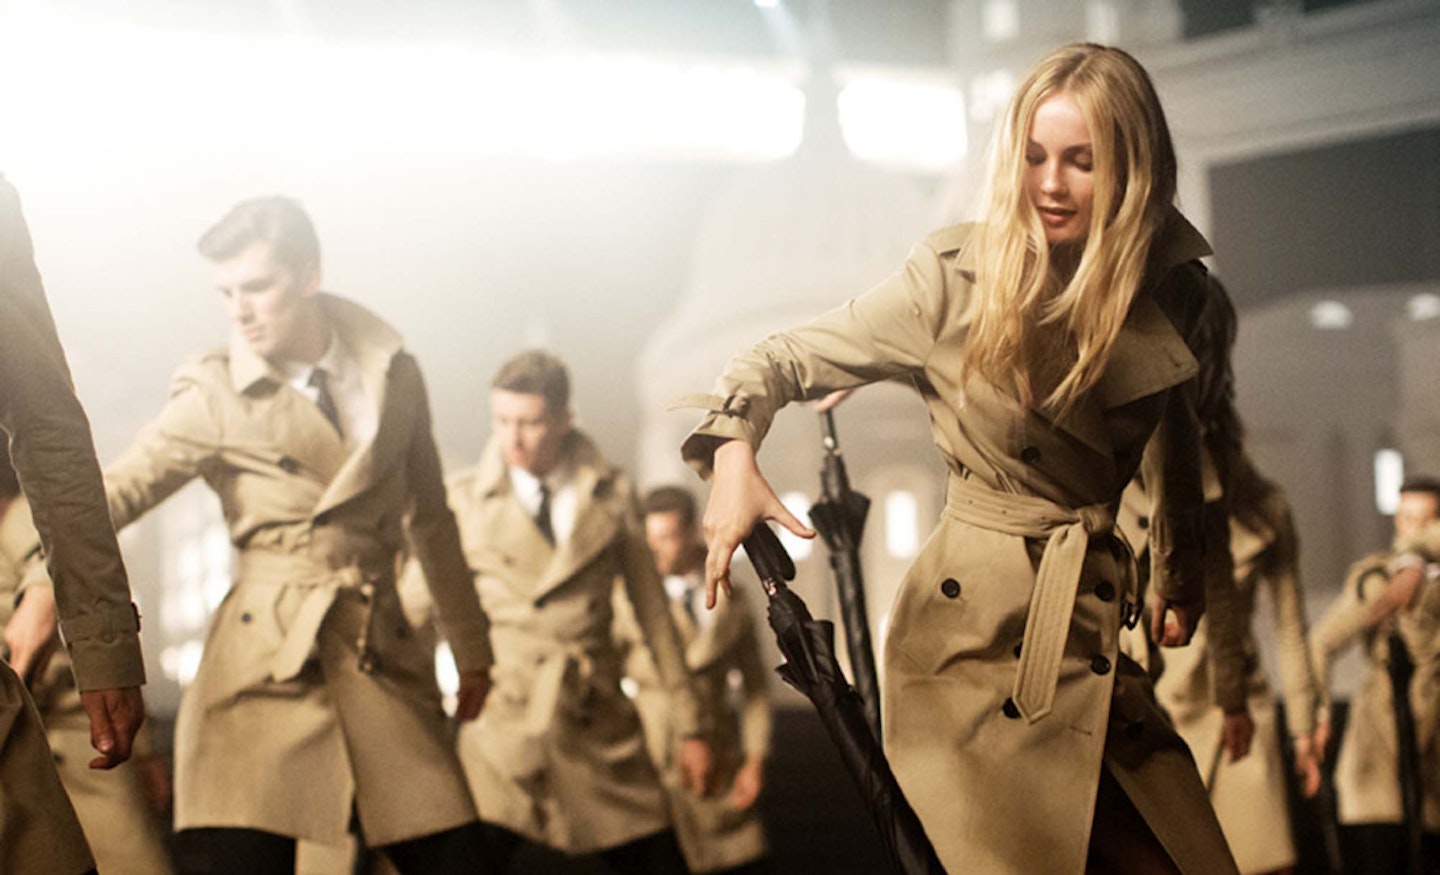 18._Burberry_Festive_Campaign_Stills__PRIVATE_AND_CONFIDENTIAL_-_ON_EMBARGO_9PM_UK_TIME_3_NOVEMBER_